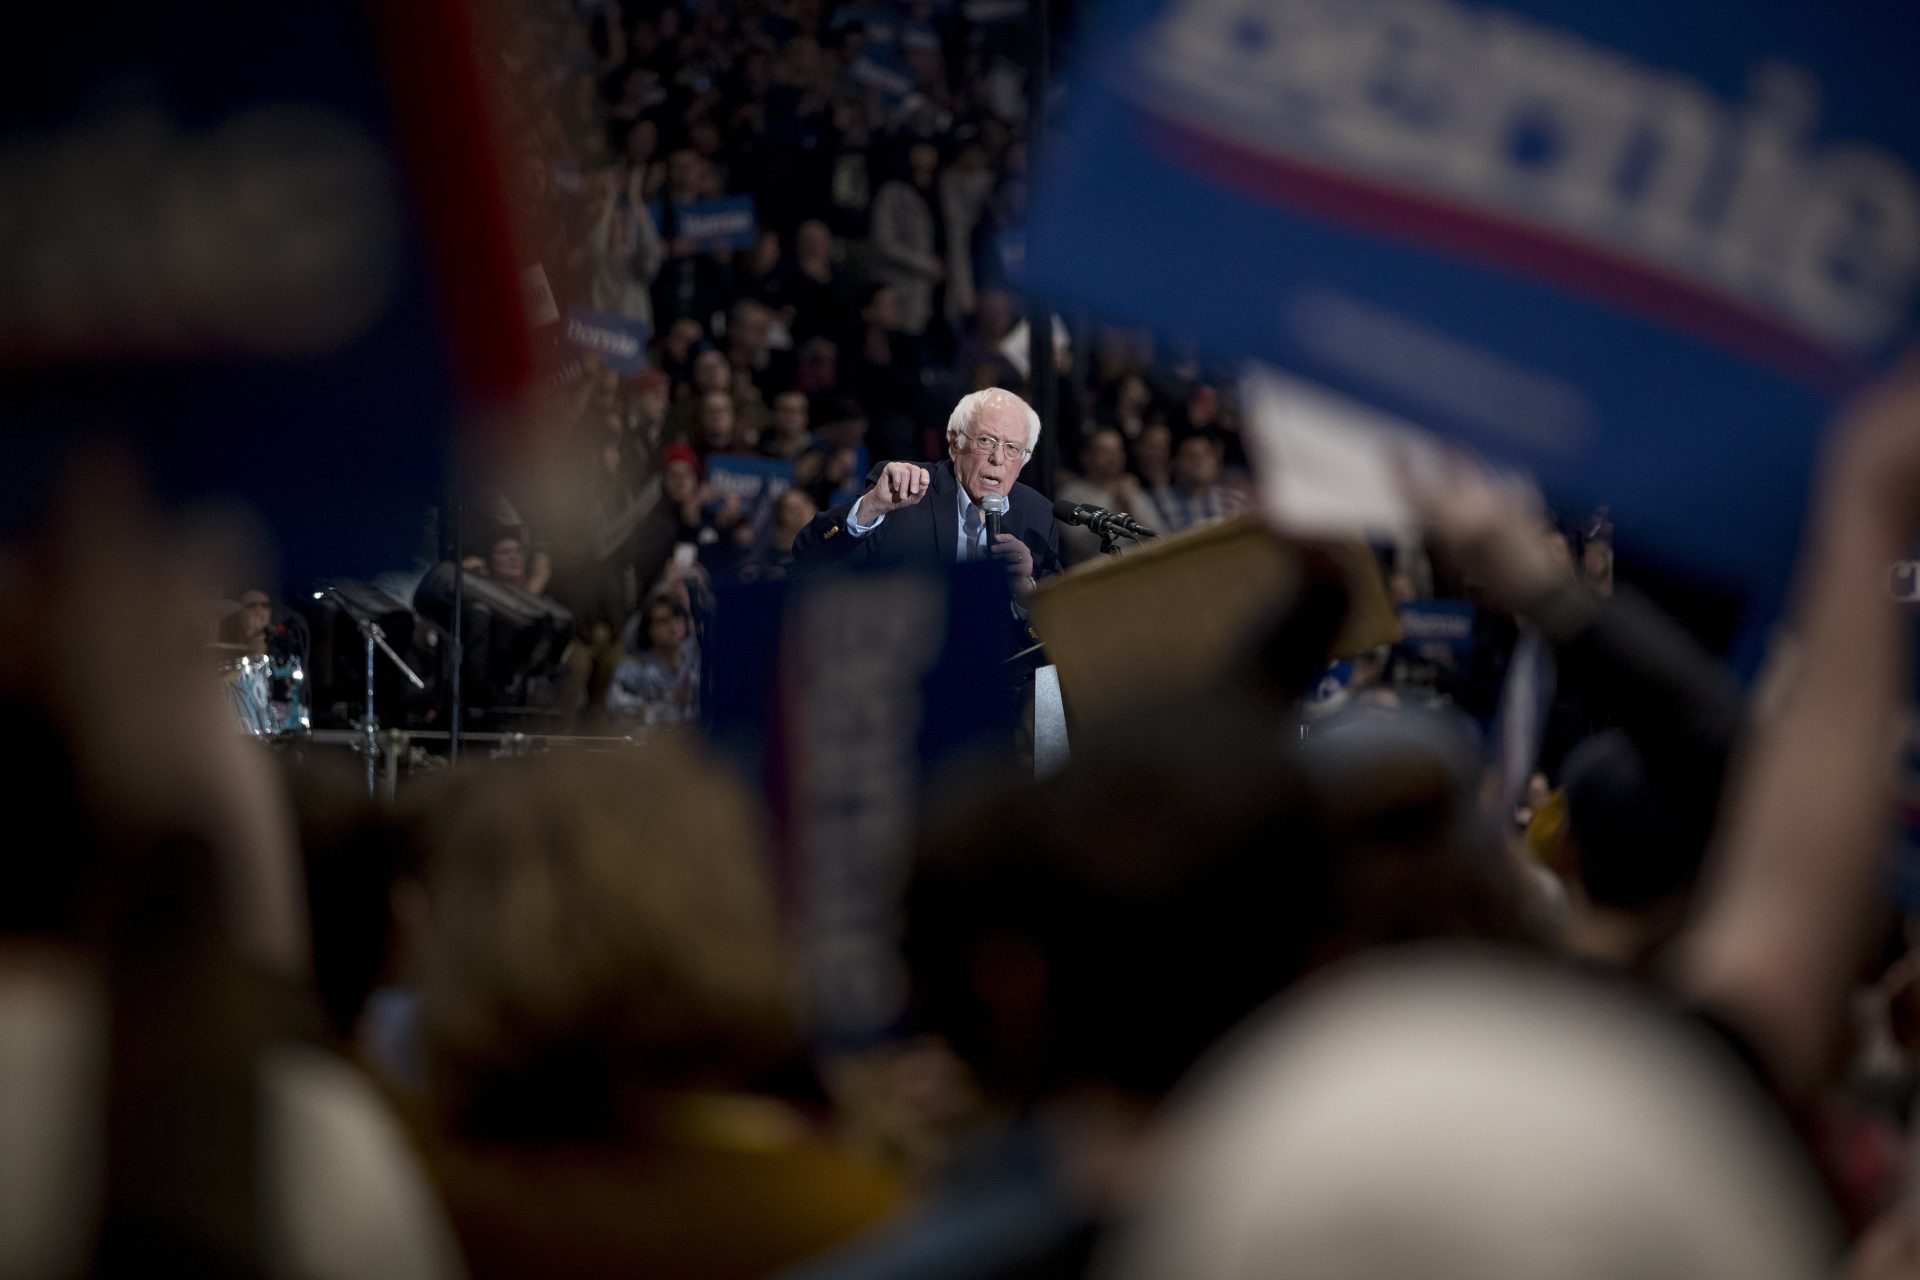 Democratic presidential candidate Sen. Bernie Sanders, I-Vt., speaks at a campaign stop at the Whittemore Center Arena at the University of New Hampshire, Monday, Feb. 10, 2020, in Durham, N.H.